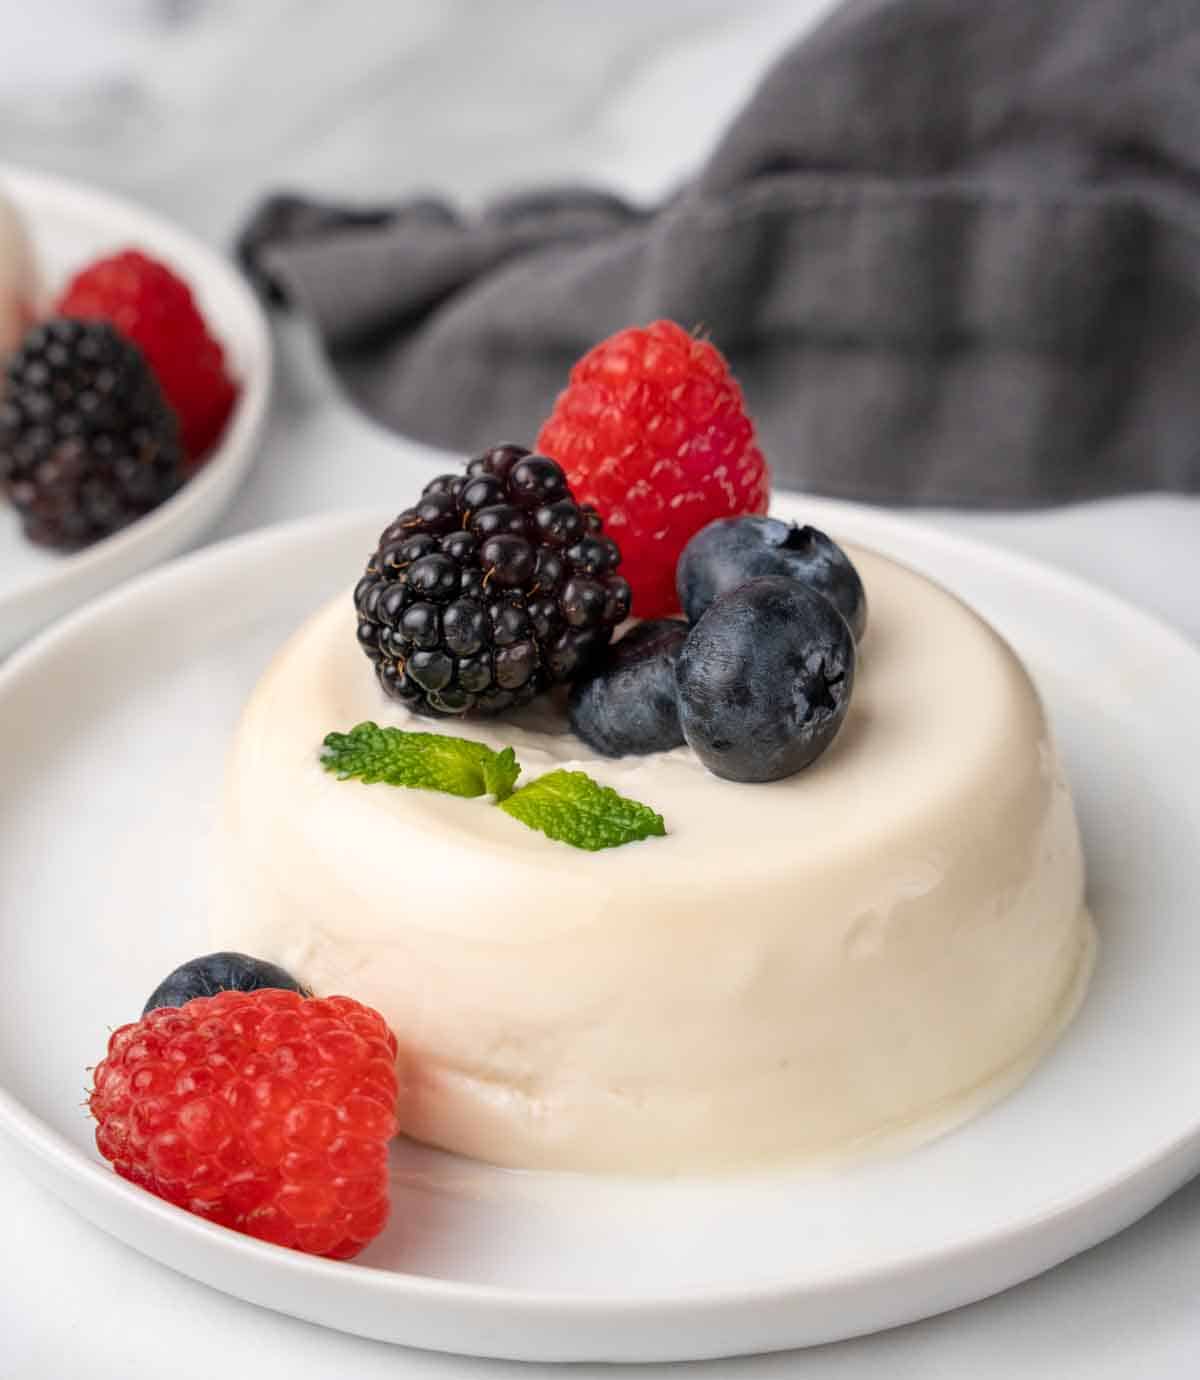 Panna cotta on white plate with berries.